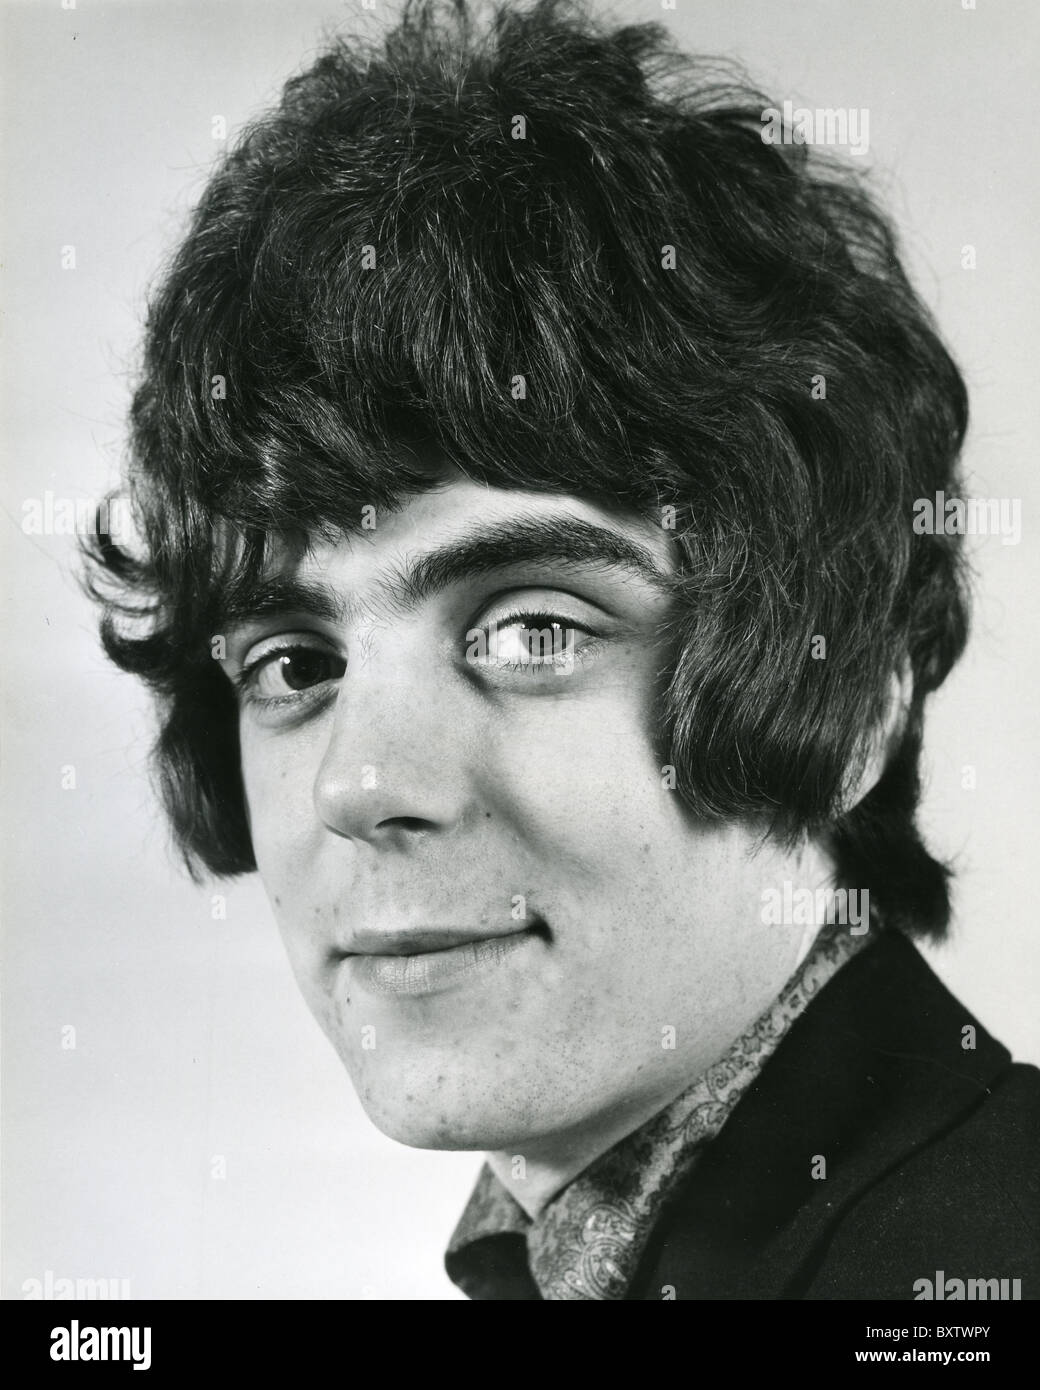 TERRY REID MAY - UK pop singer in May 1968. Photo Tony Gale Stock Photo